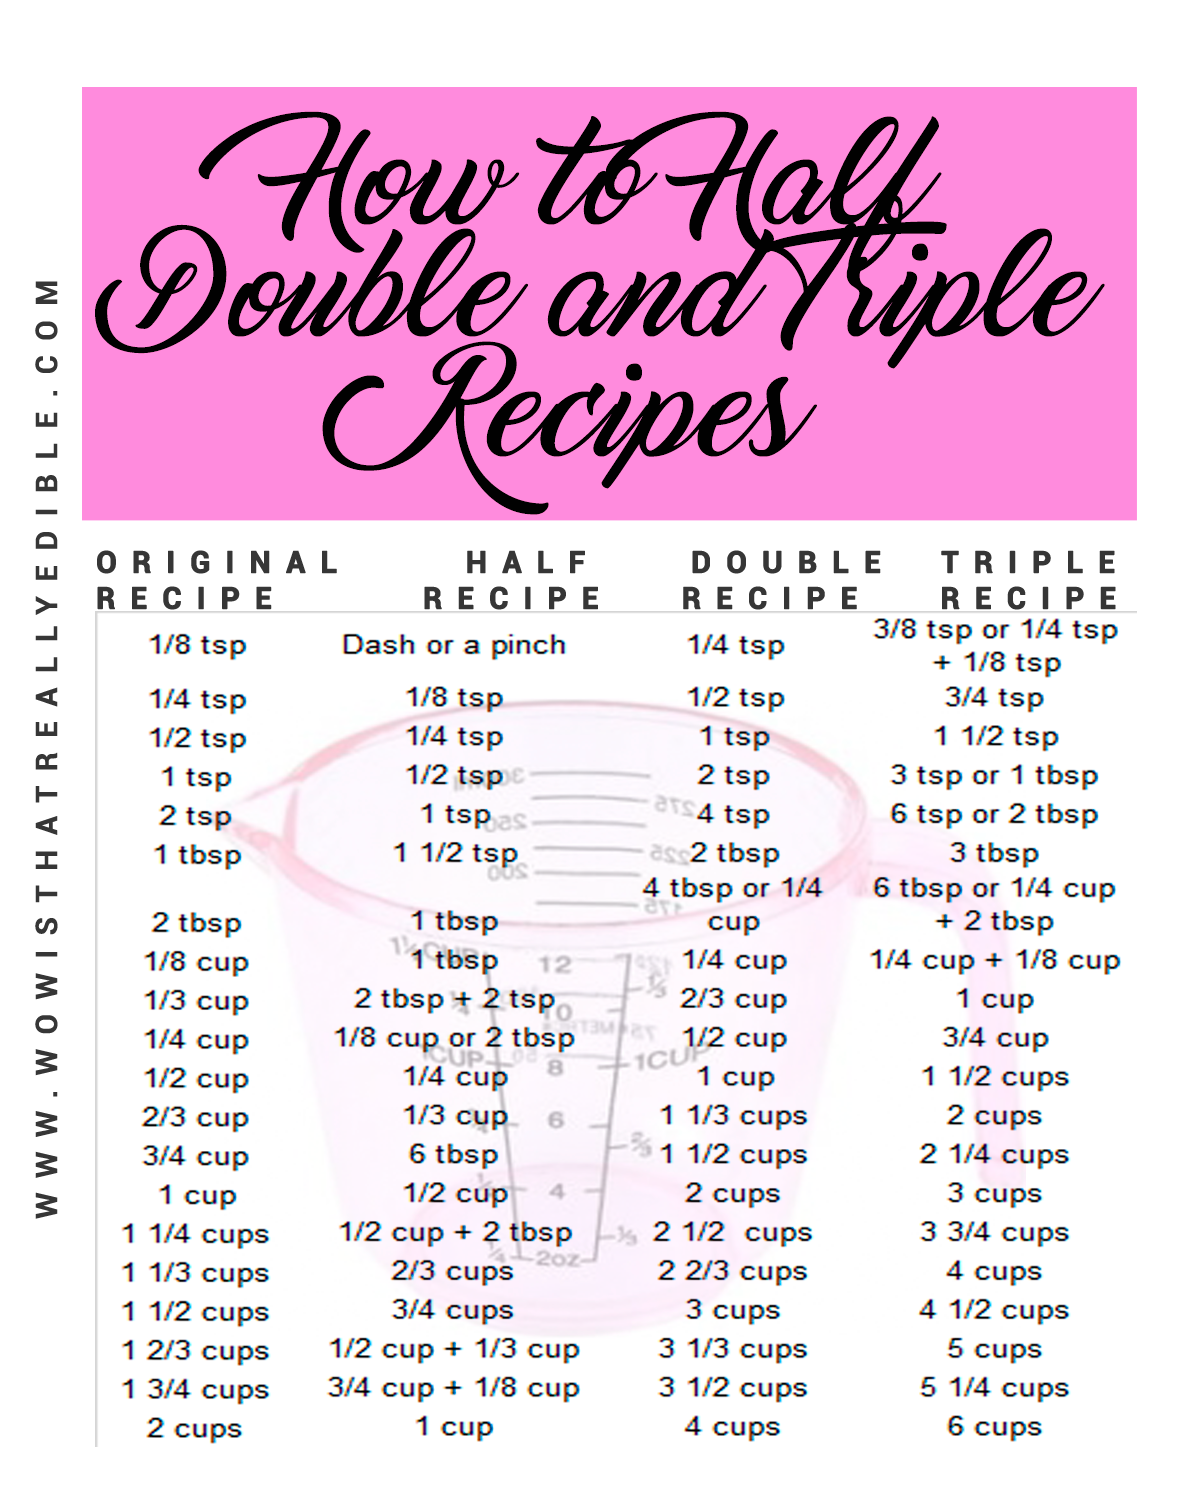 How to Half, Double and Triple Recipes - Wow! Is that really